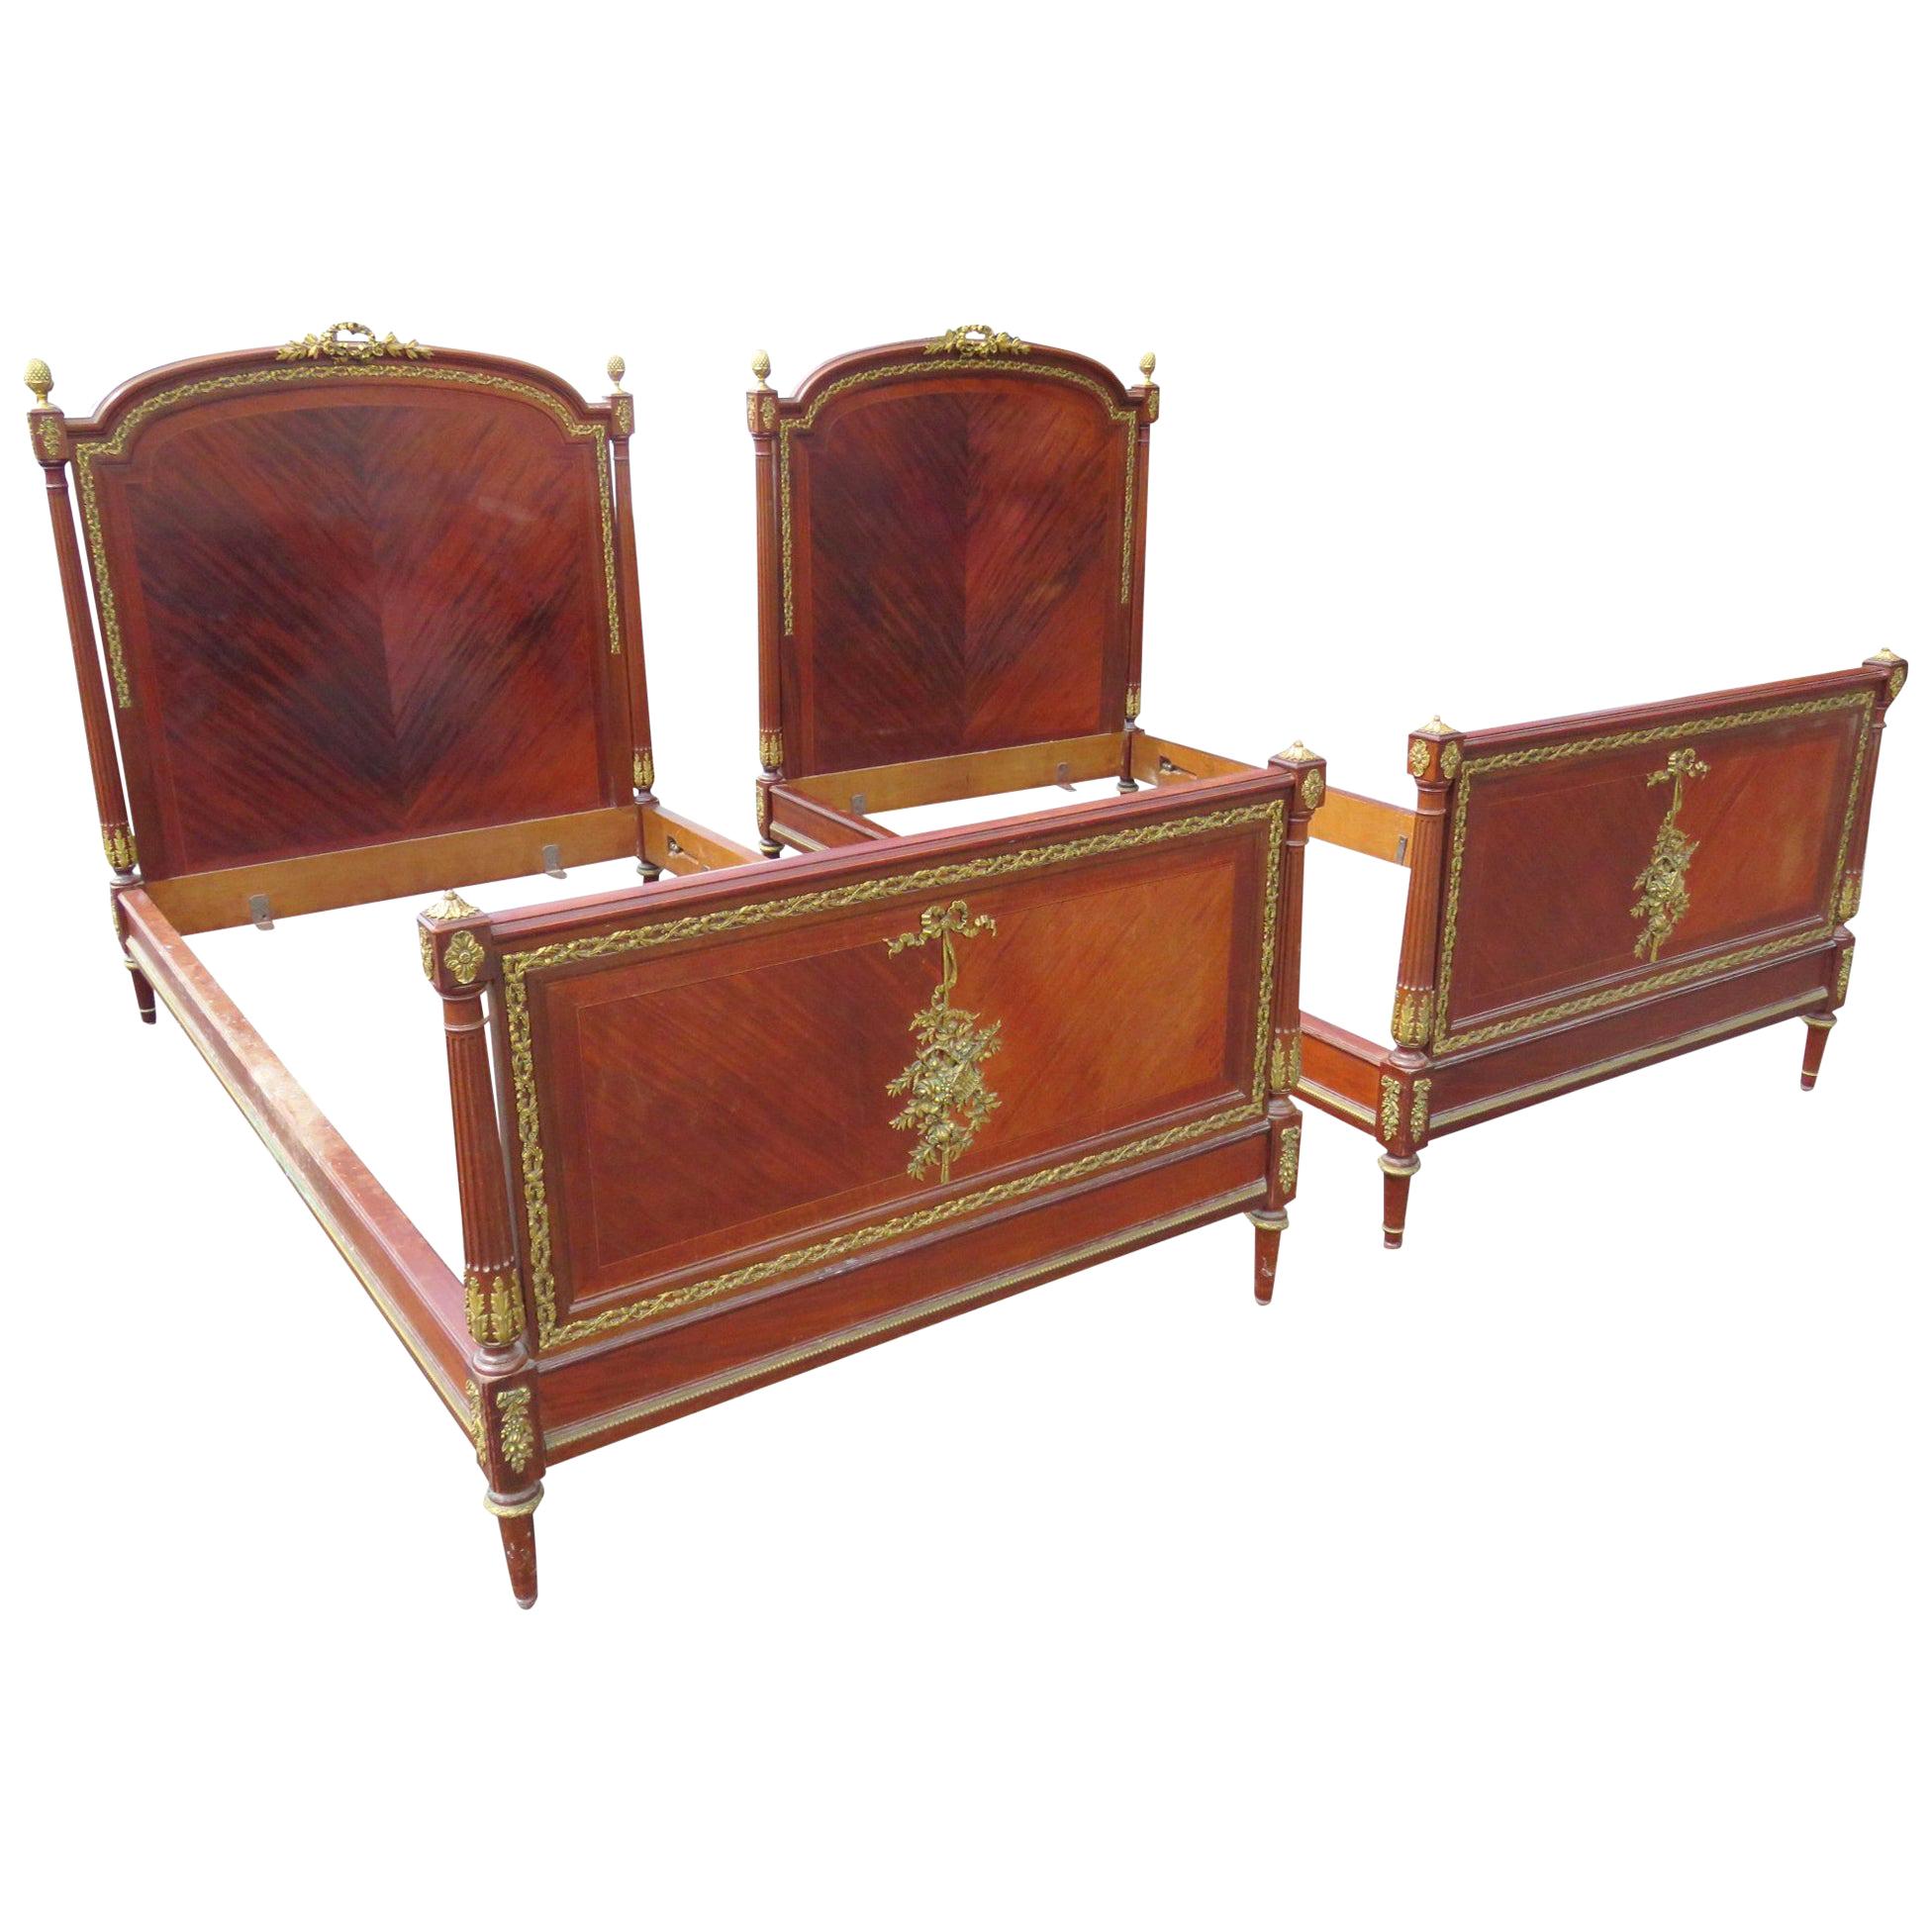 Franclois Linke Marquetry Inlaid Mahogany Bronze Mounted Twin Single Beds